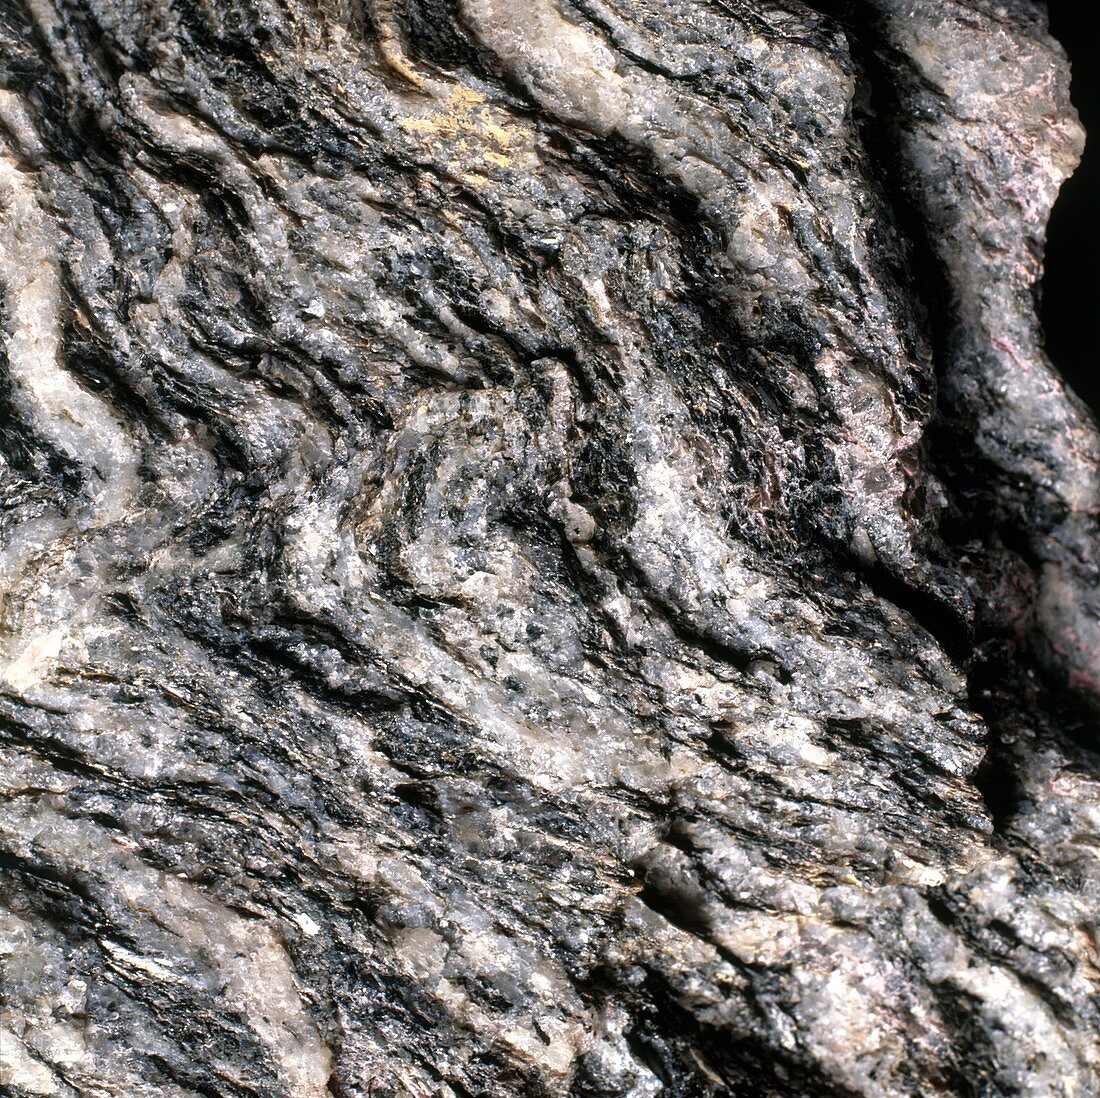 Magnification of grain of gneiss rock